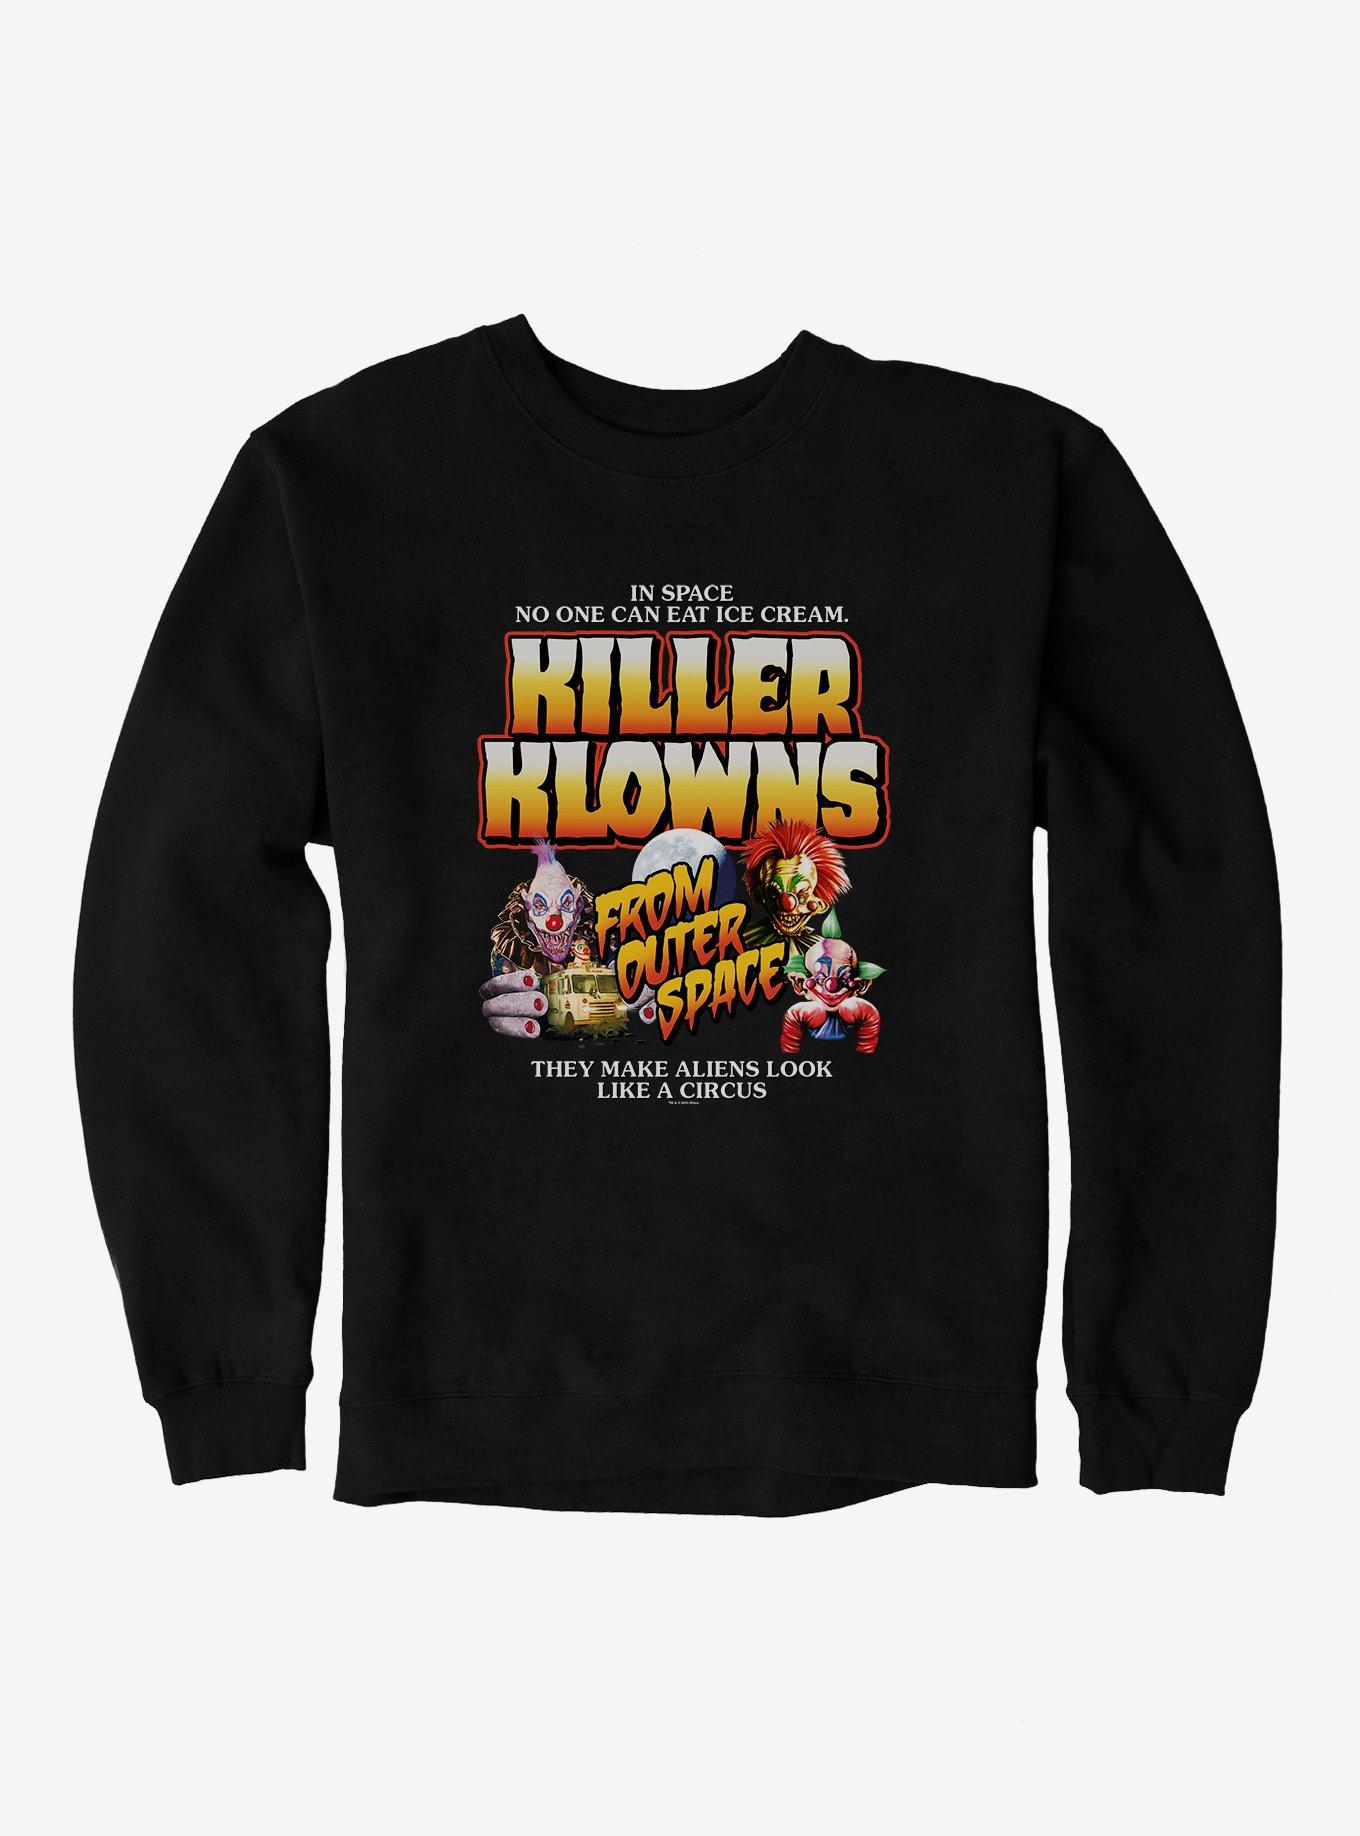 Killer Klowns From Outer Space In Space No One Can Eat Ice Cream Sweatshirt, BLACK, hi-res